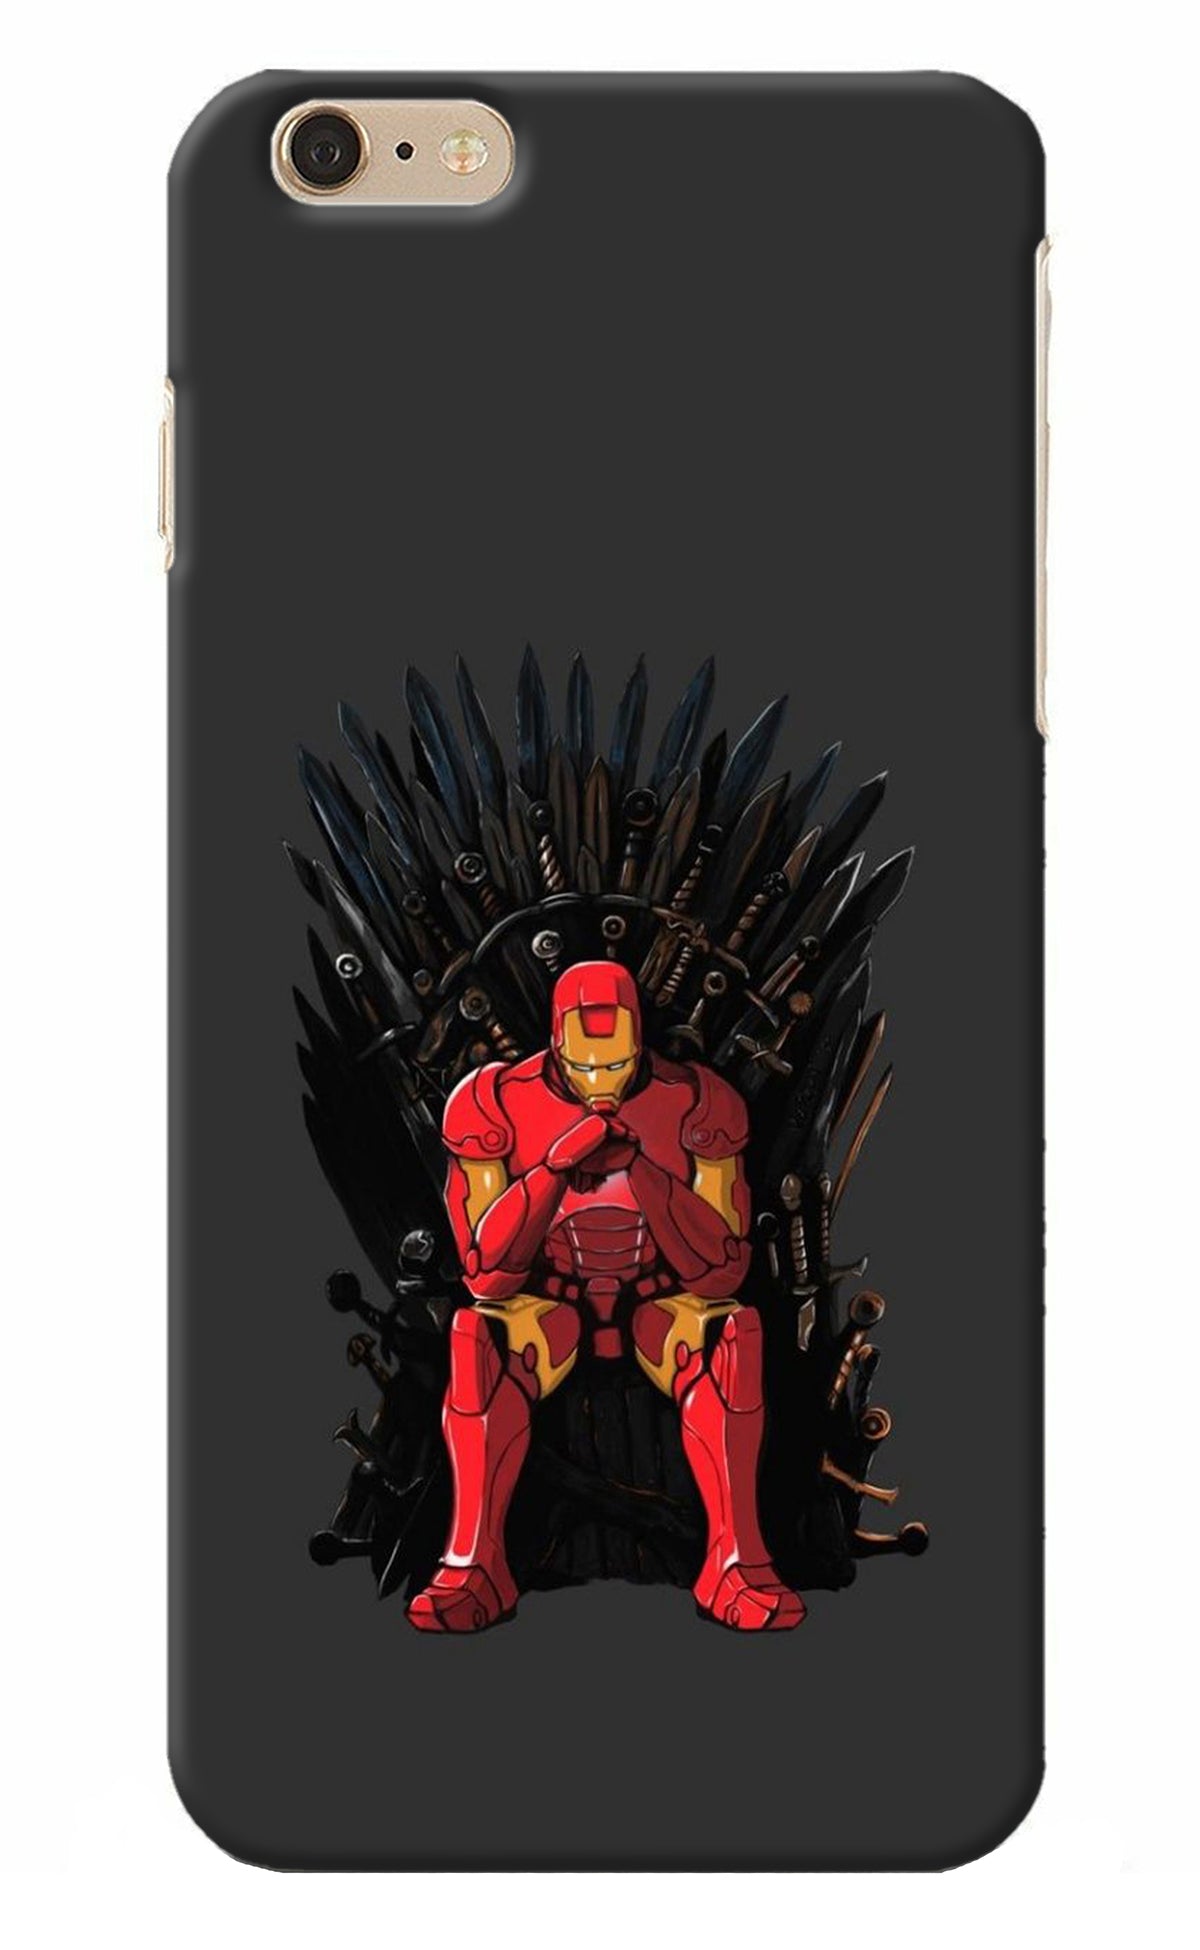 Ironman Throne iPhone 6 Plus/6s Plus Back Cover